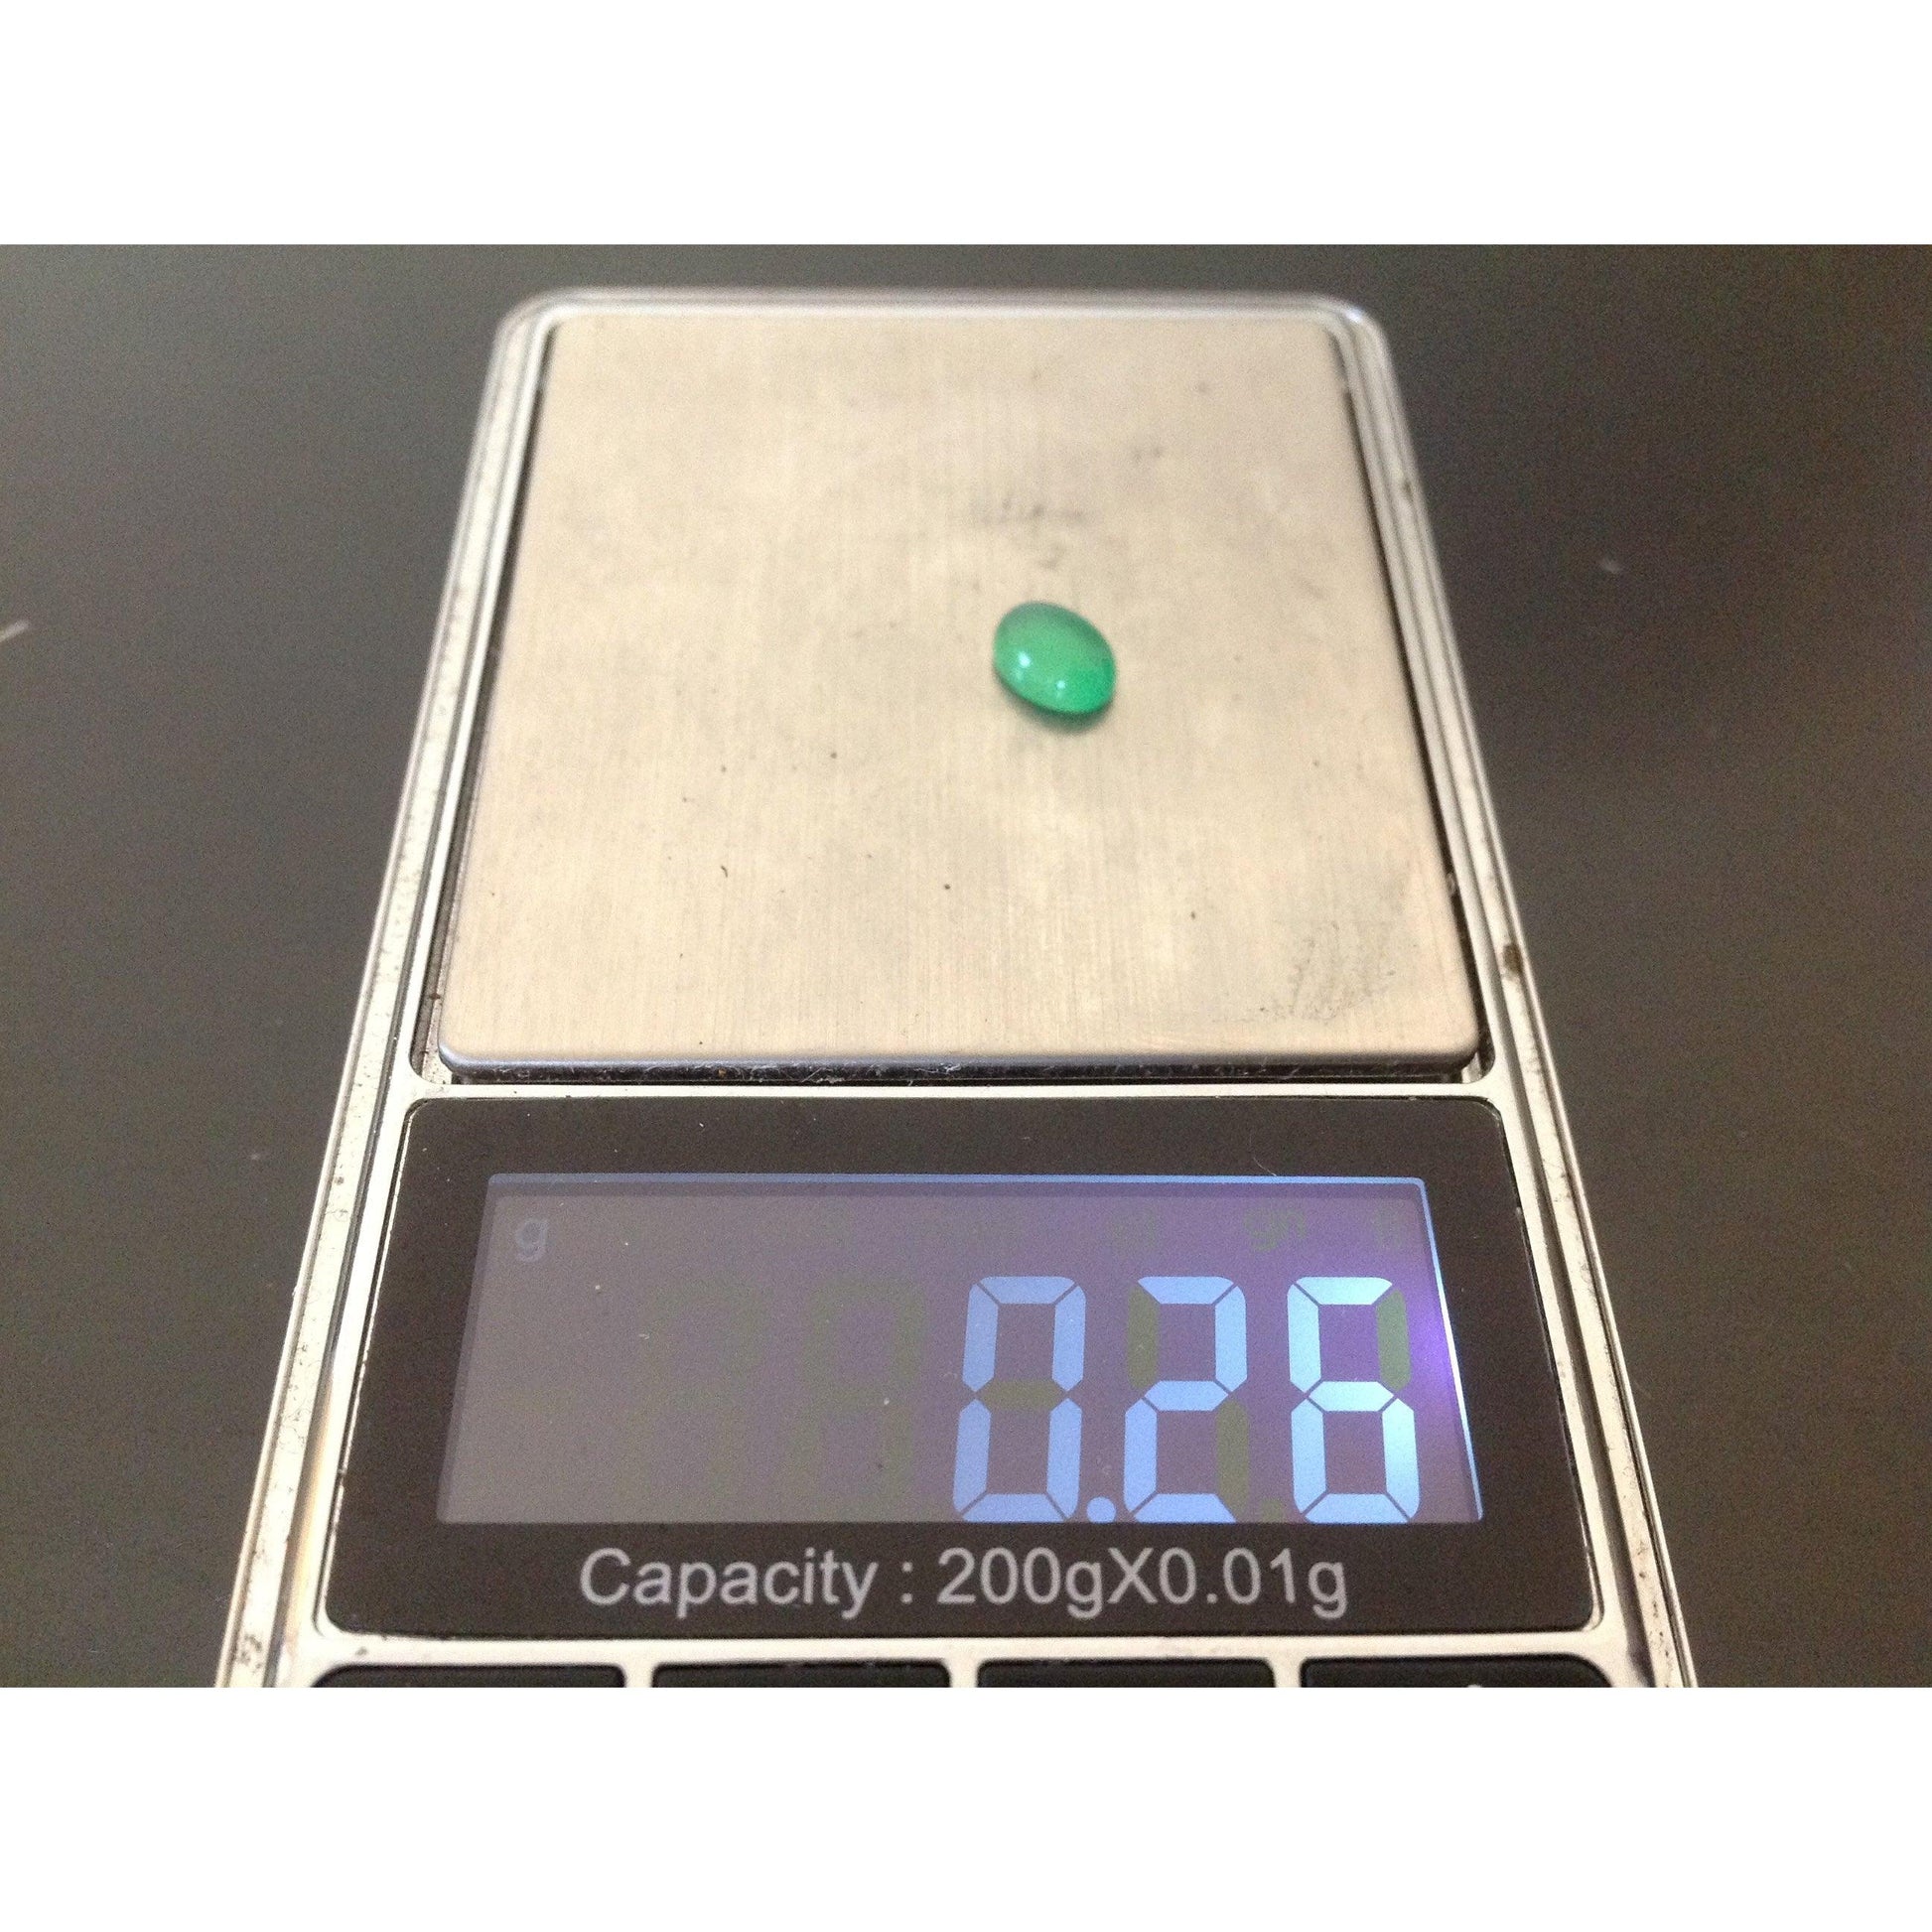 weight of the stone on weighing scale 